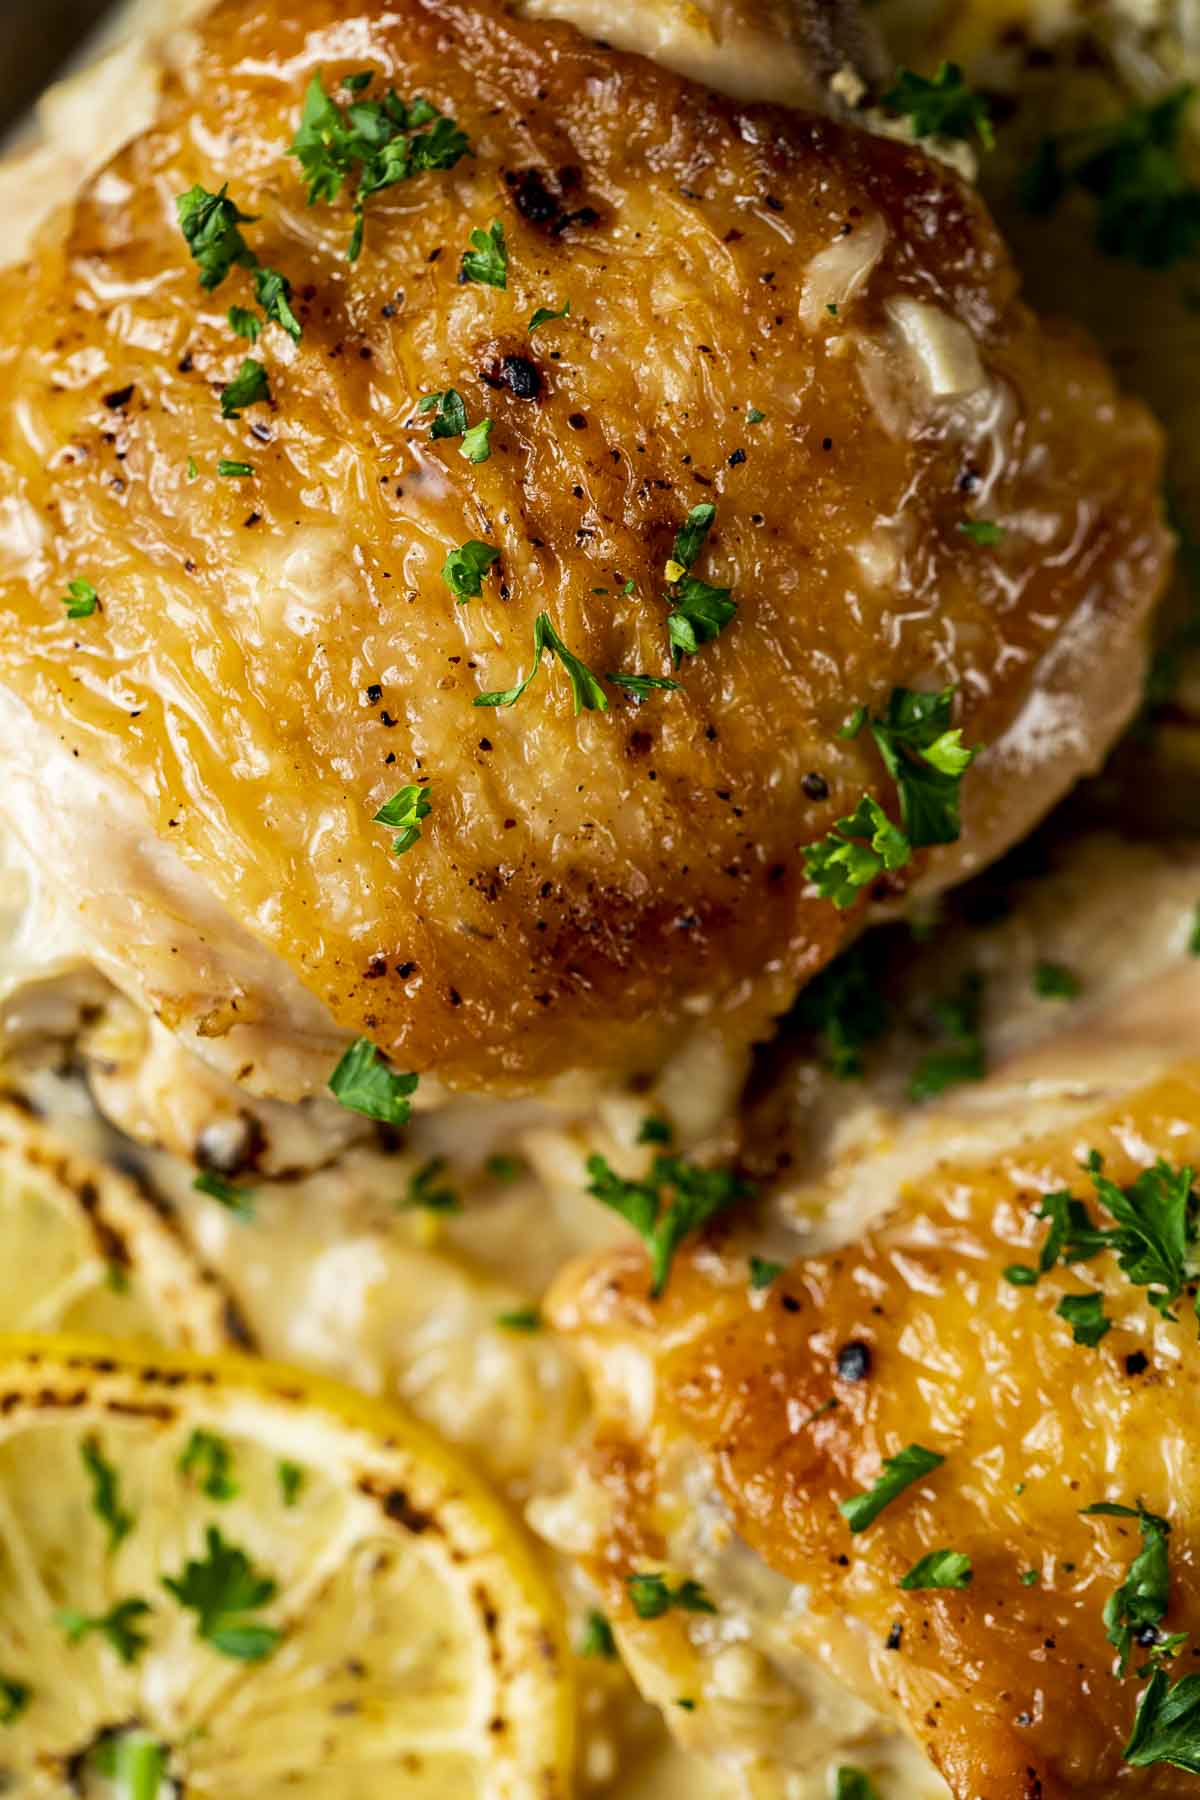 chicken thigh over a creamy white sauce garnished with lemon slices